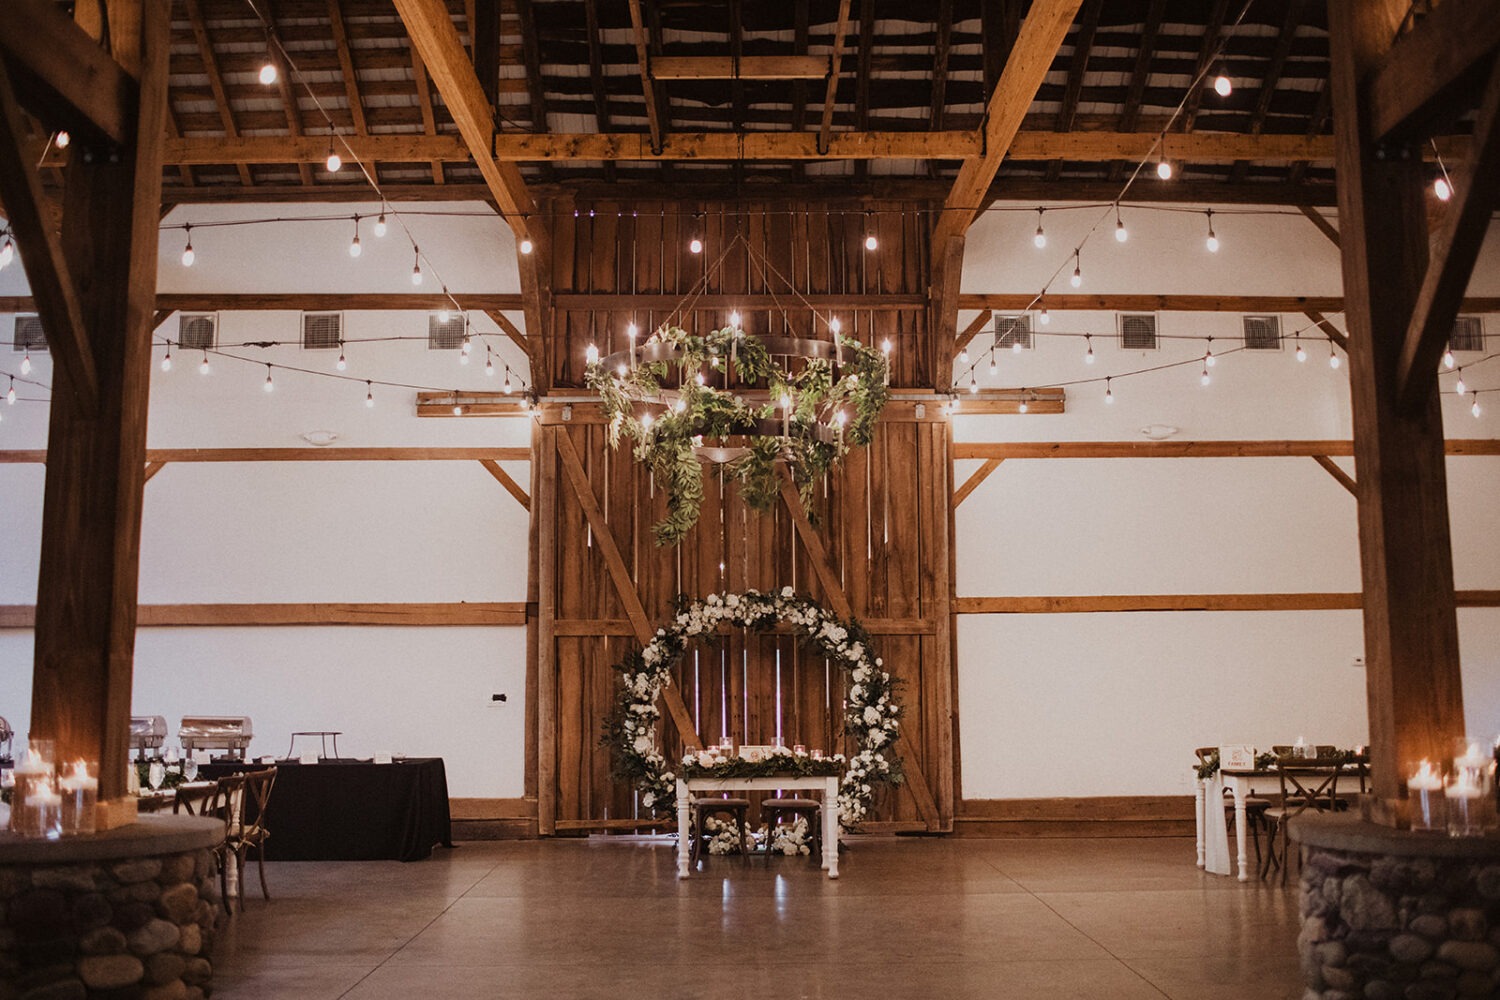 white flowers, candles and greenery as table decor at barn wedding reception